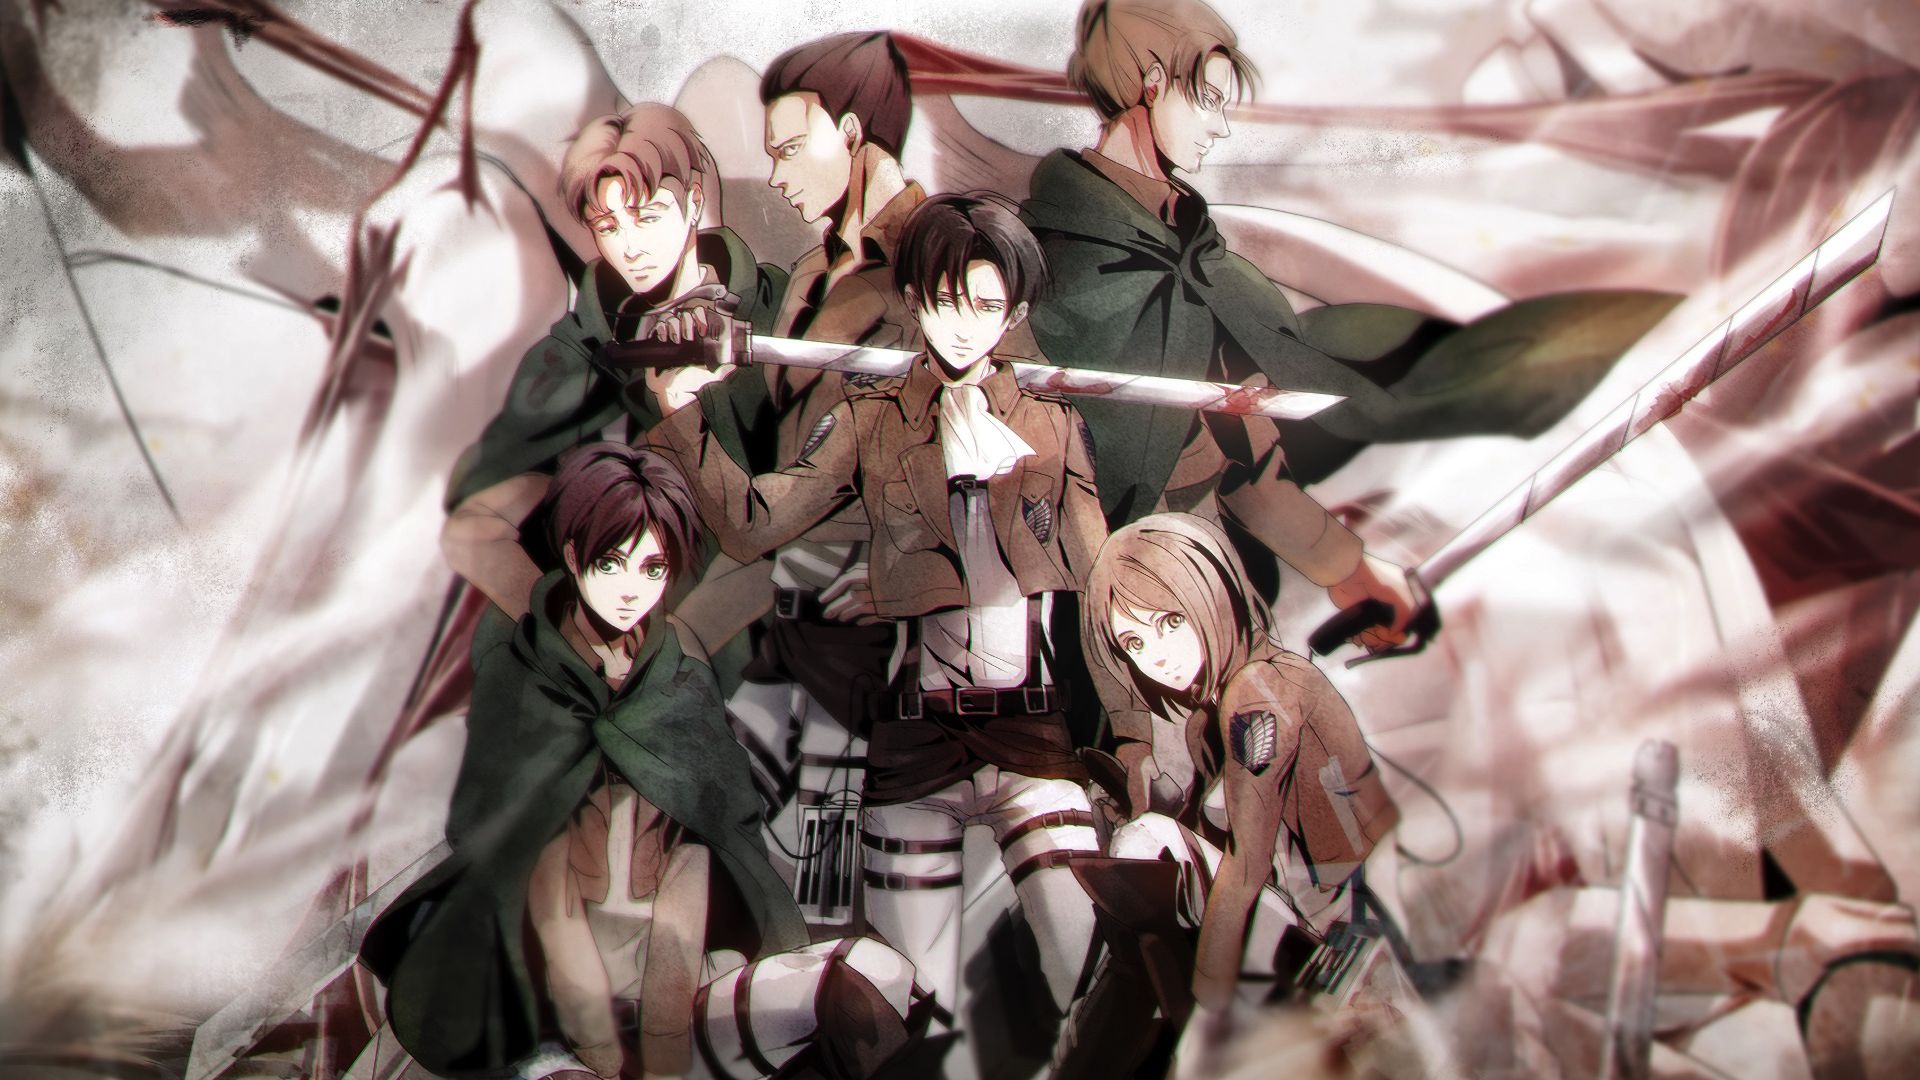 Wallpaper Attack on Titan, all characters, anime